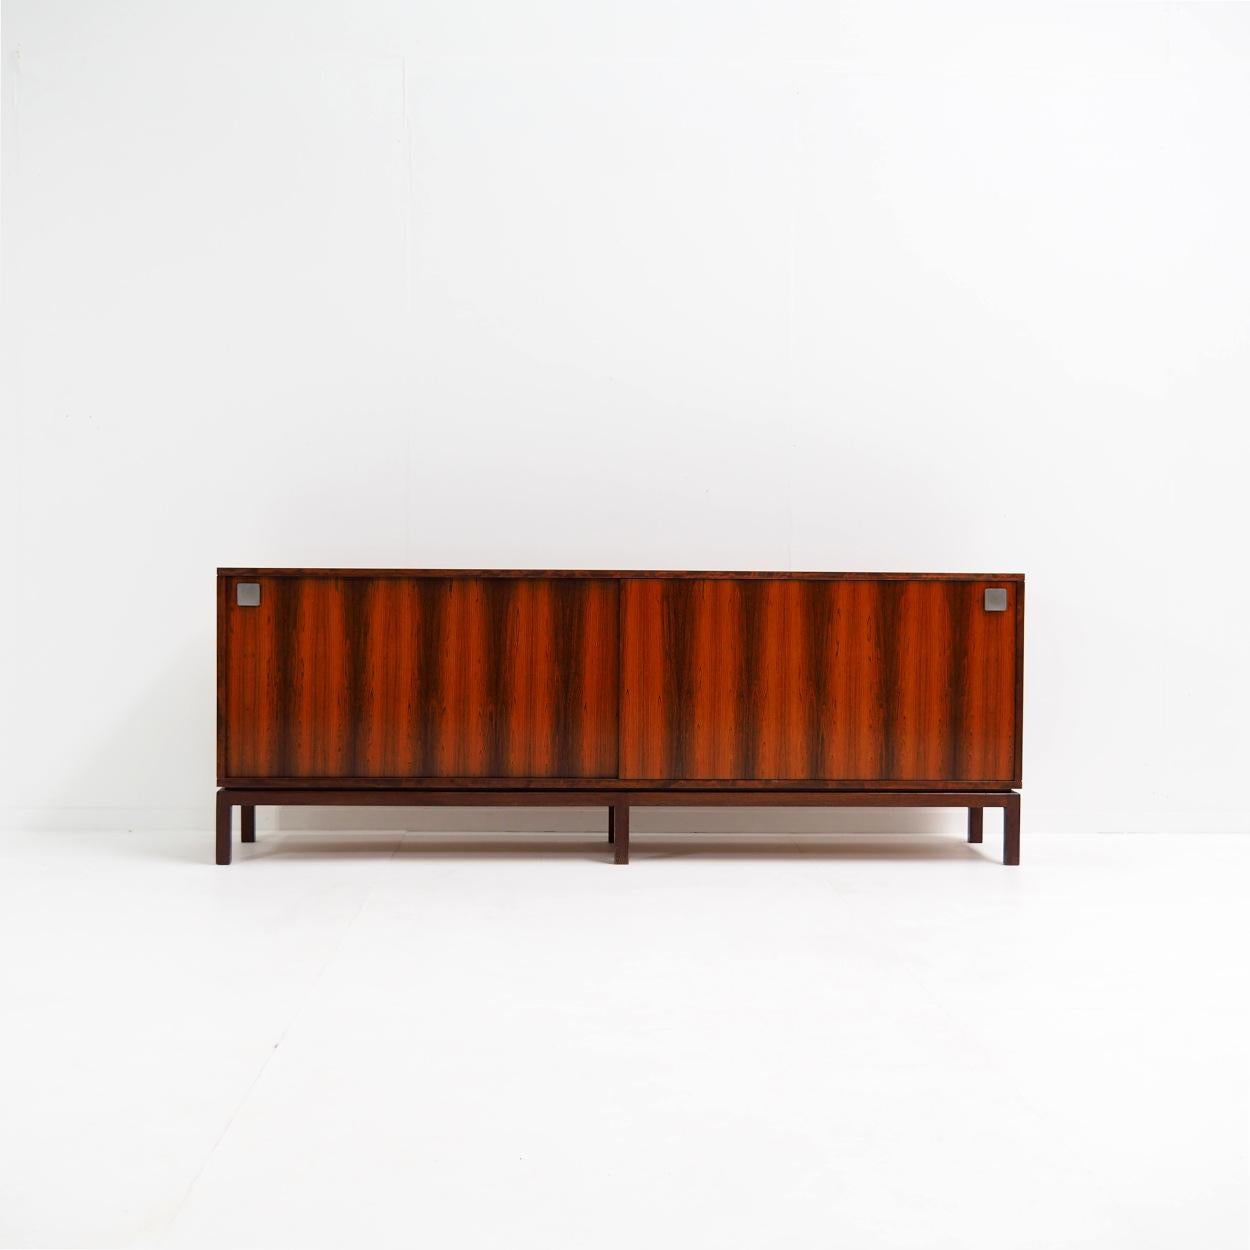 Sideboard designed by the Belgian designer Alfred Hendrickx for Belform.

The sideboard may seem simple at first sight, but it has very clean lines creating a beautiful and perfect symmetrical composition. Pay particular attention to the shape and